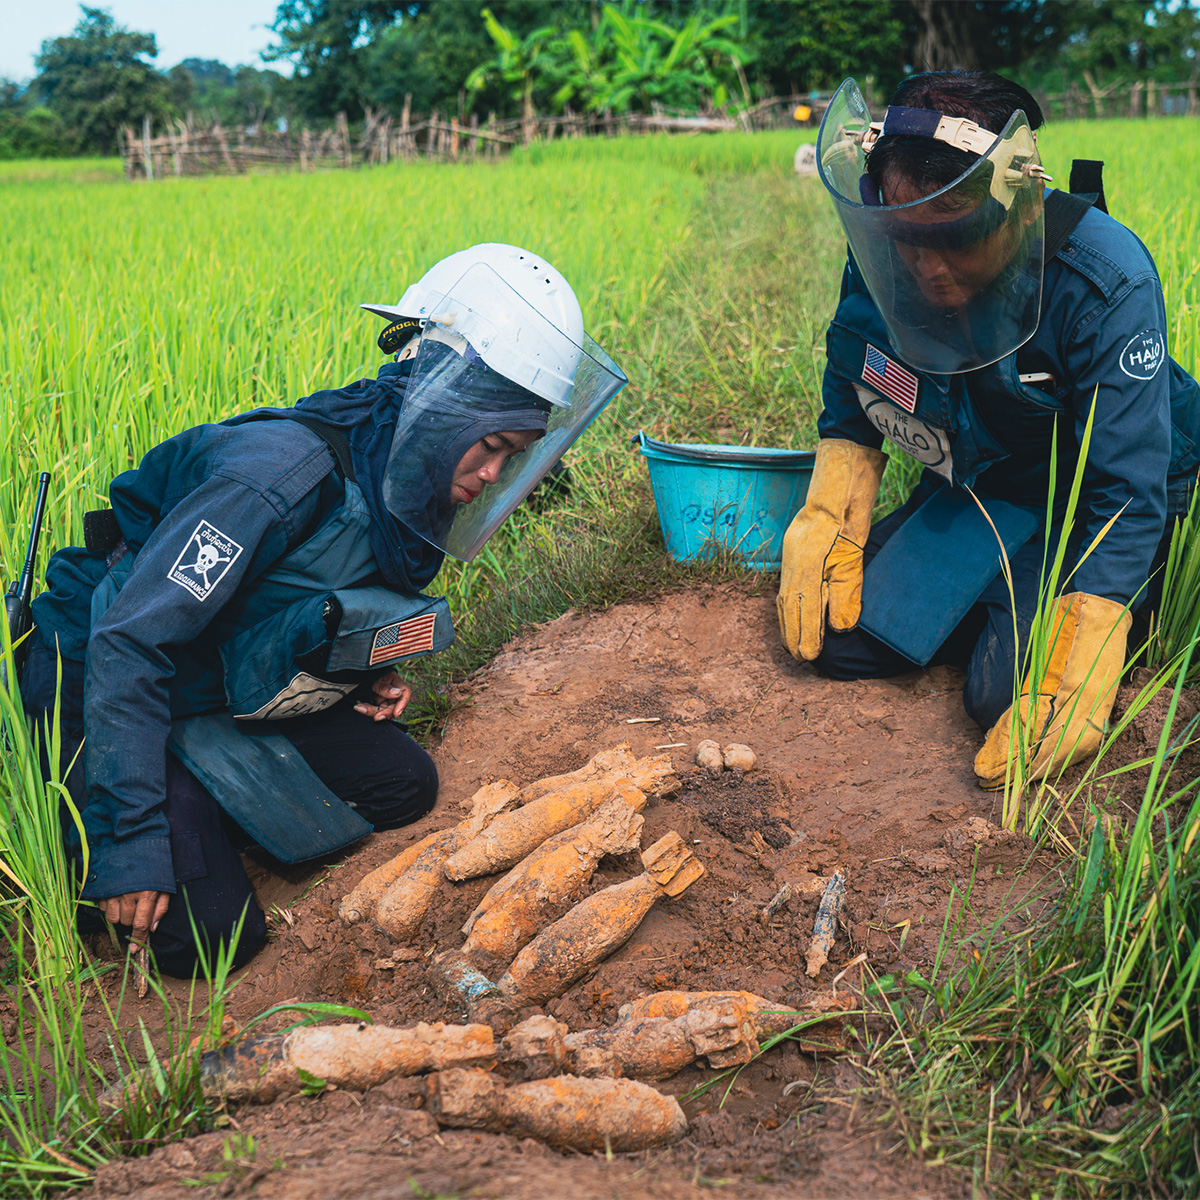 For those in the U.S.🇺🇸, writing Congress about the legacy of UXO💣 in Southeast Asia has never been easier. Thanks to the folks at @HALOTrustUSA, @PeaceTreesVN, @legaciesofwar, and @MAGsaveslives for raising awareness about this issue. ➡️ bit.ly/3qDW0M4